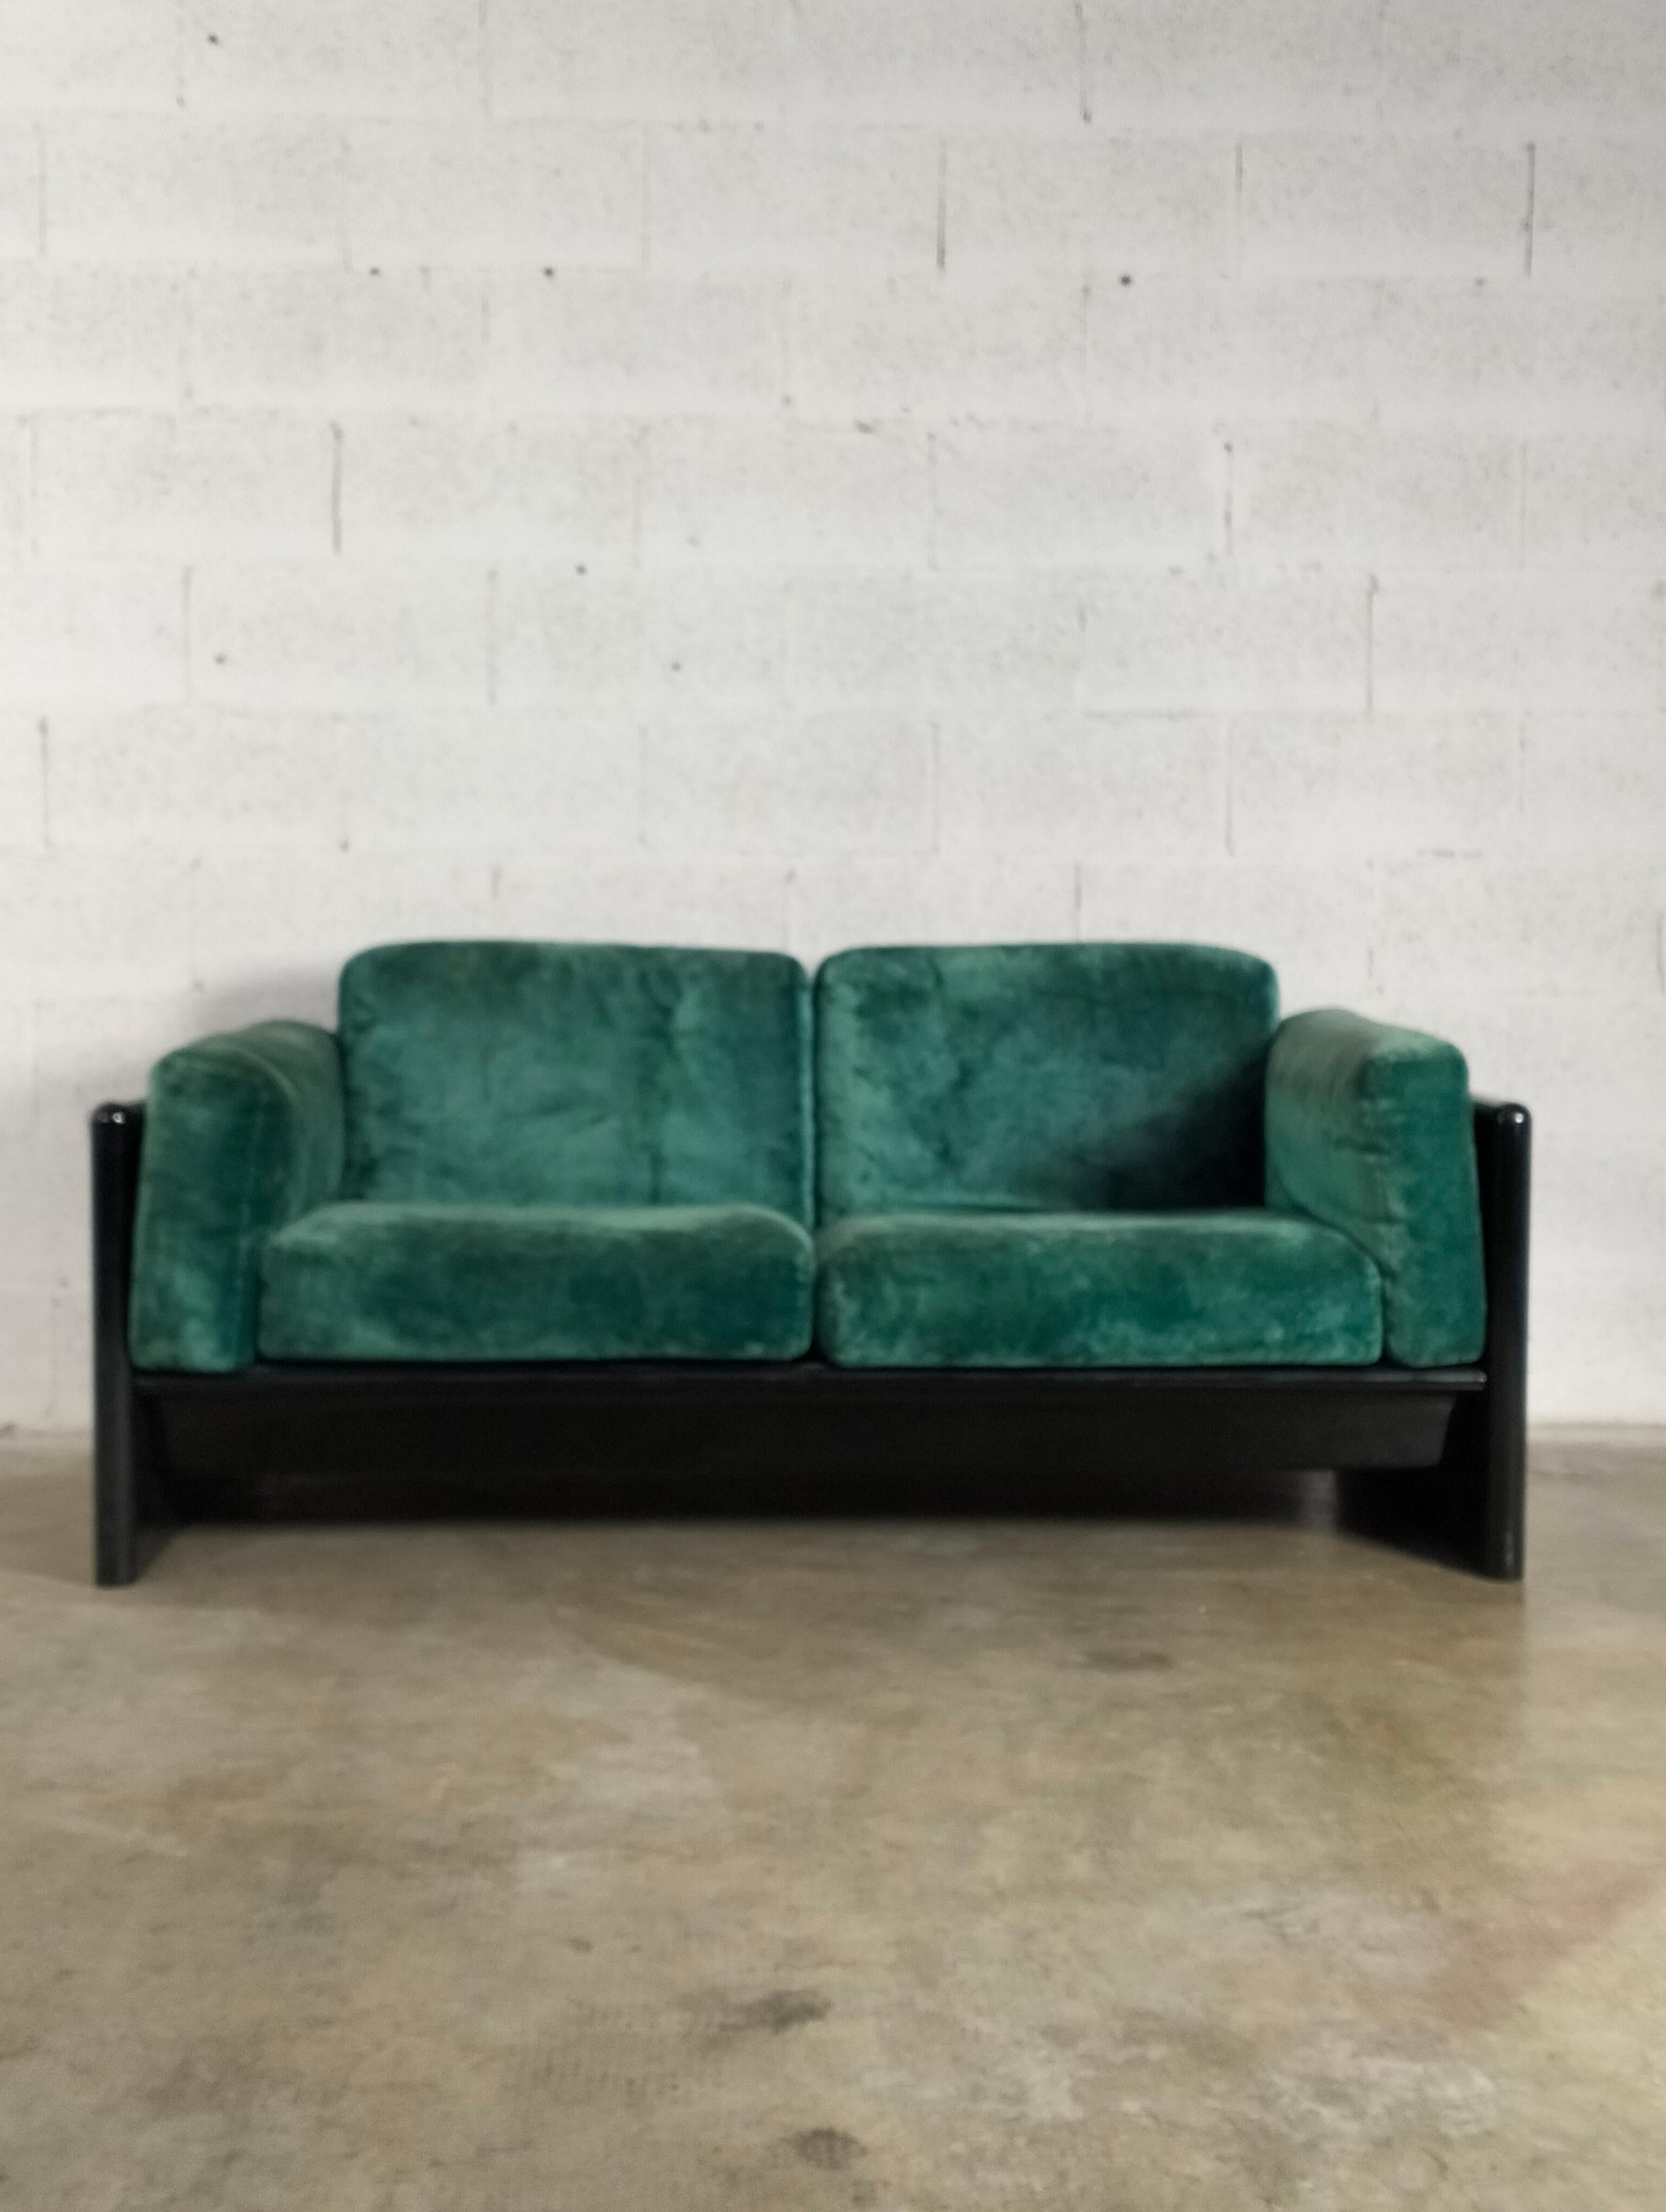 70s green couch